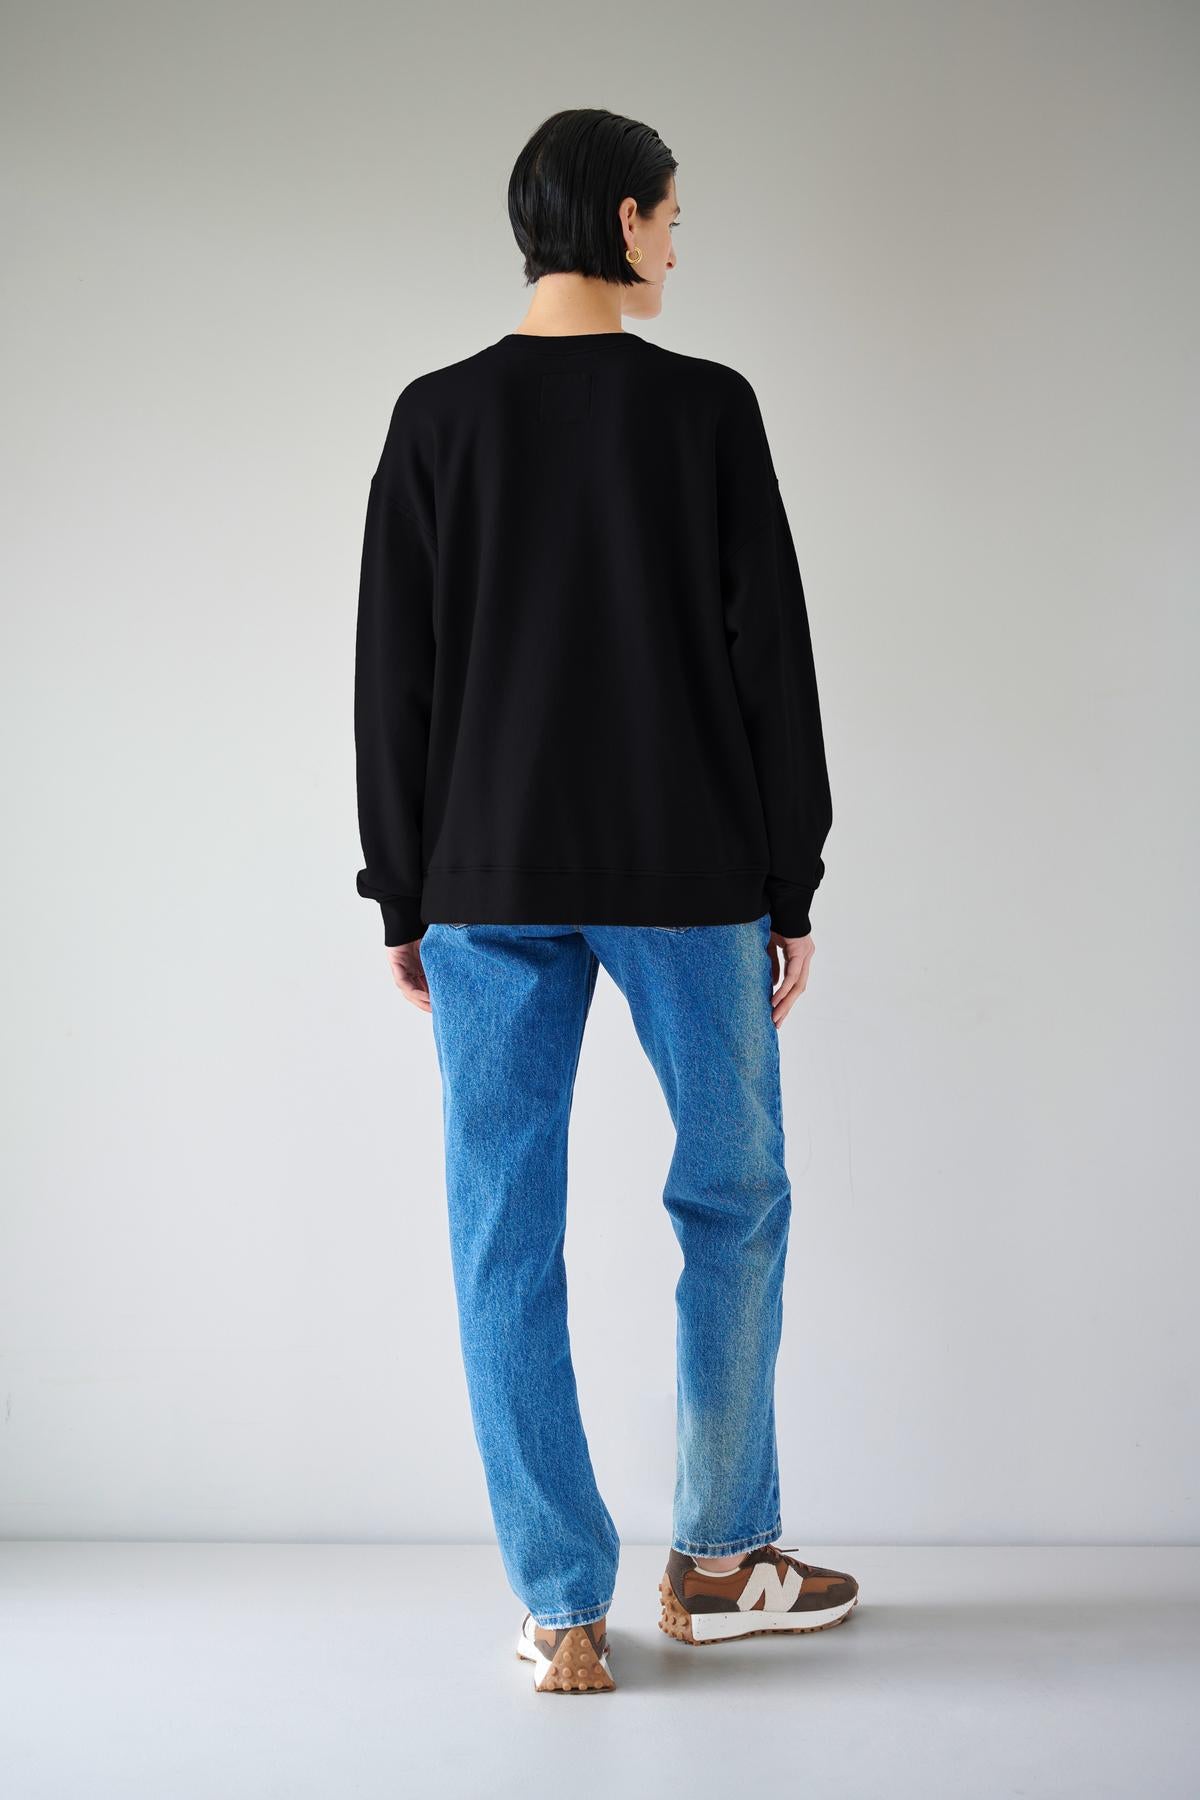 The slouchy back view of a woman rocking organic cotton jeans and an Abbot sweatshirt from Velvet by Jenny Graham with styling versatility.-35190150365377